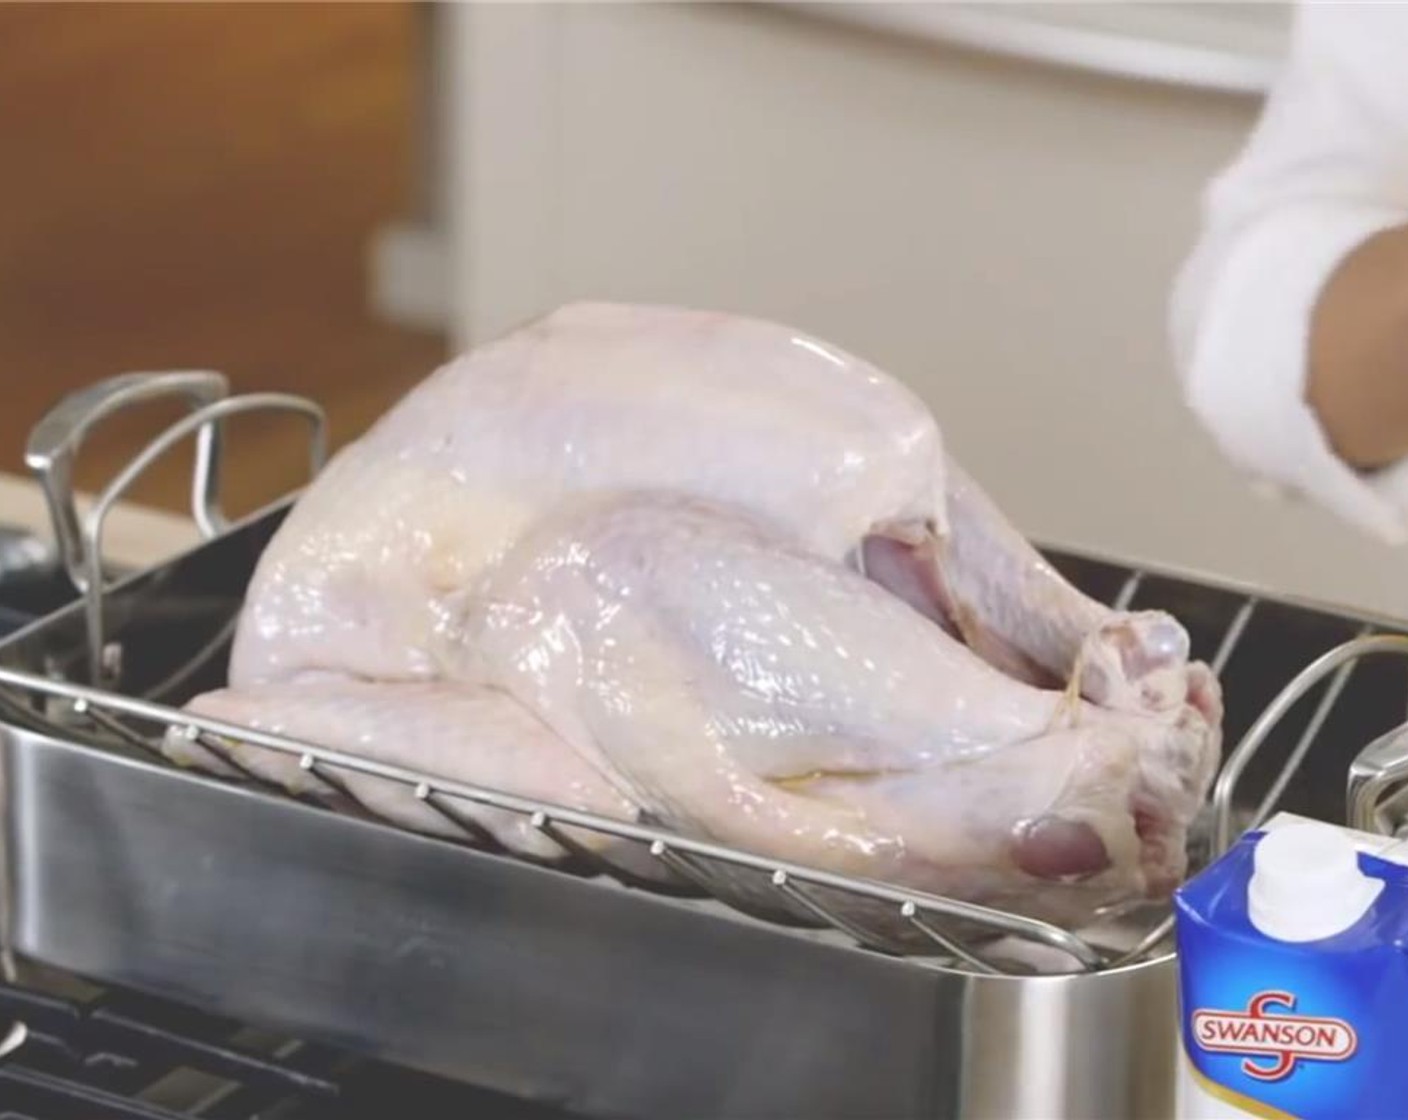 step 1 Preheat oven to 325 degrees F (160 degrees C). Remove the package of giblets and neck from the cavity of the Whole Turkey (12 lb). Rinse the turkey with cold water and pat dry with a paper towel. Tie the ends of the drumsticks together.